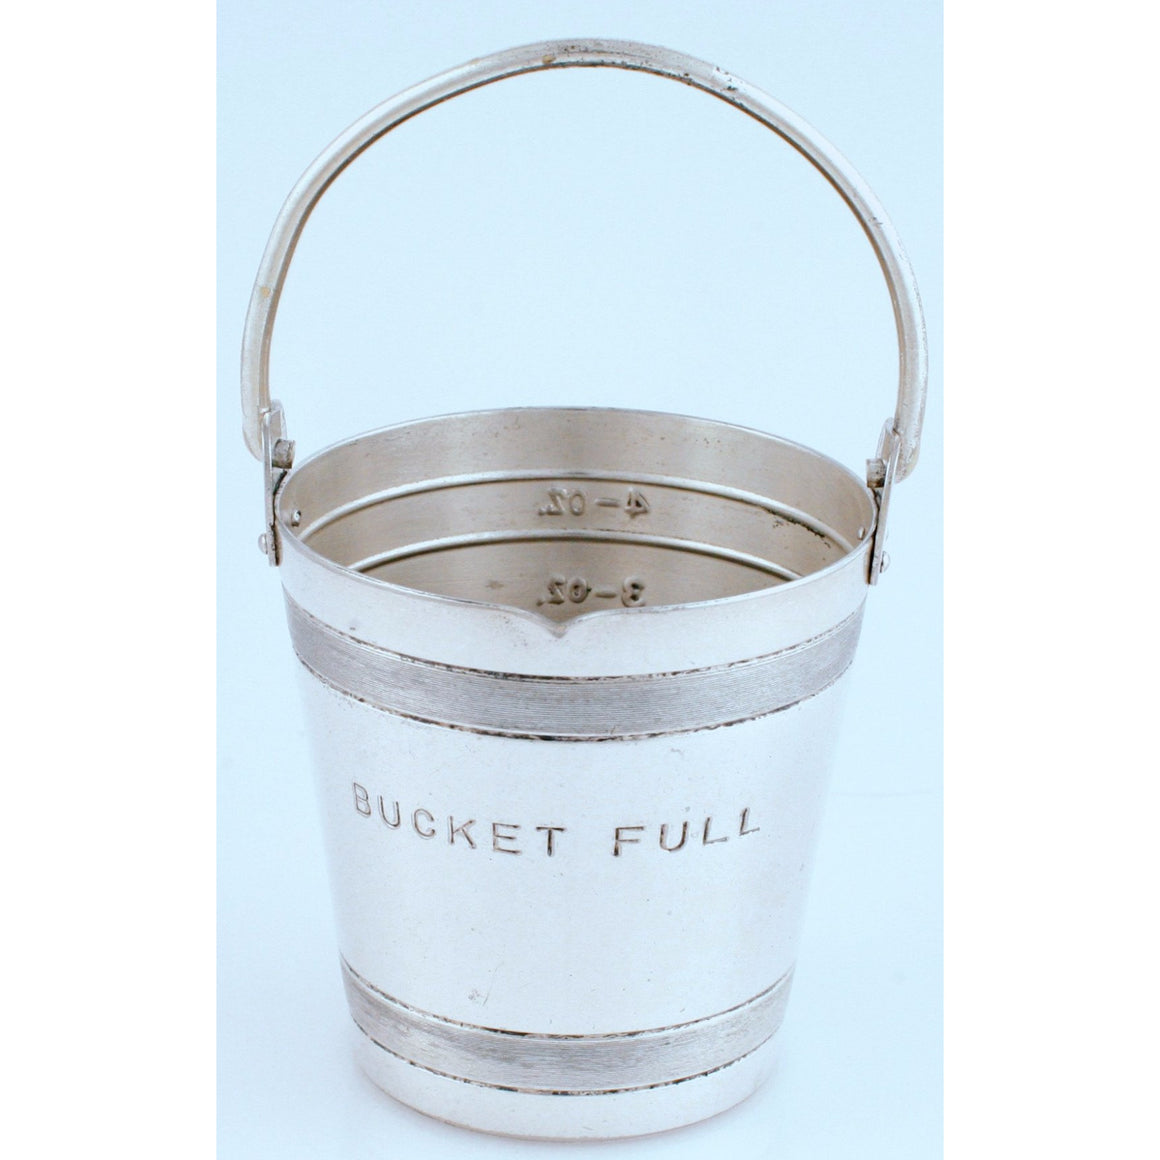 Napier Silver-Plate Bucket Full Measuring Cup